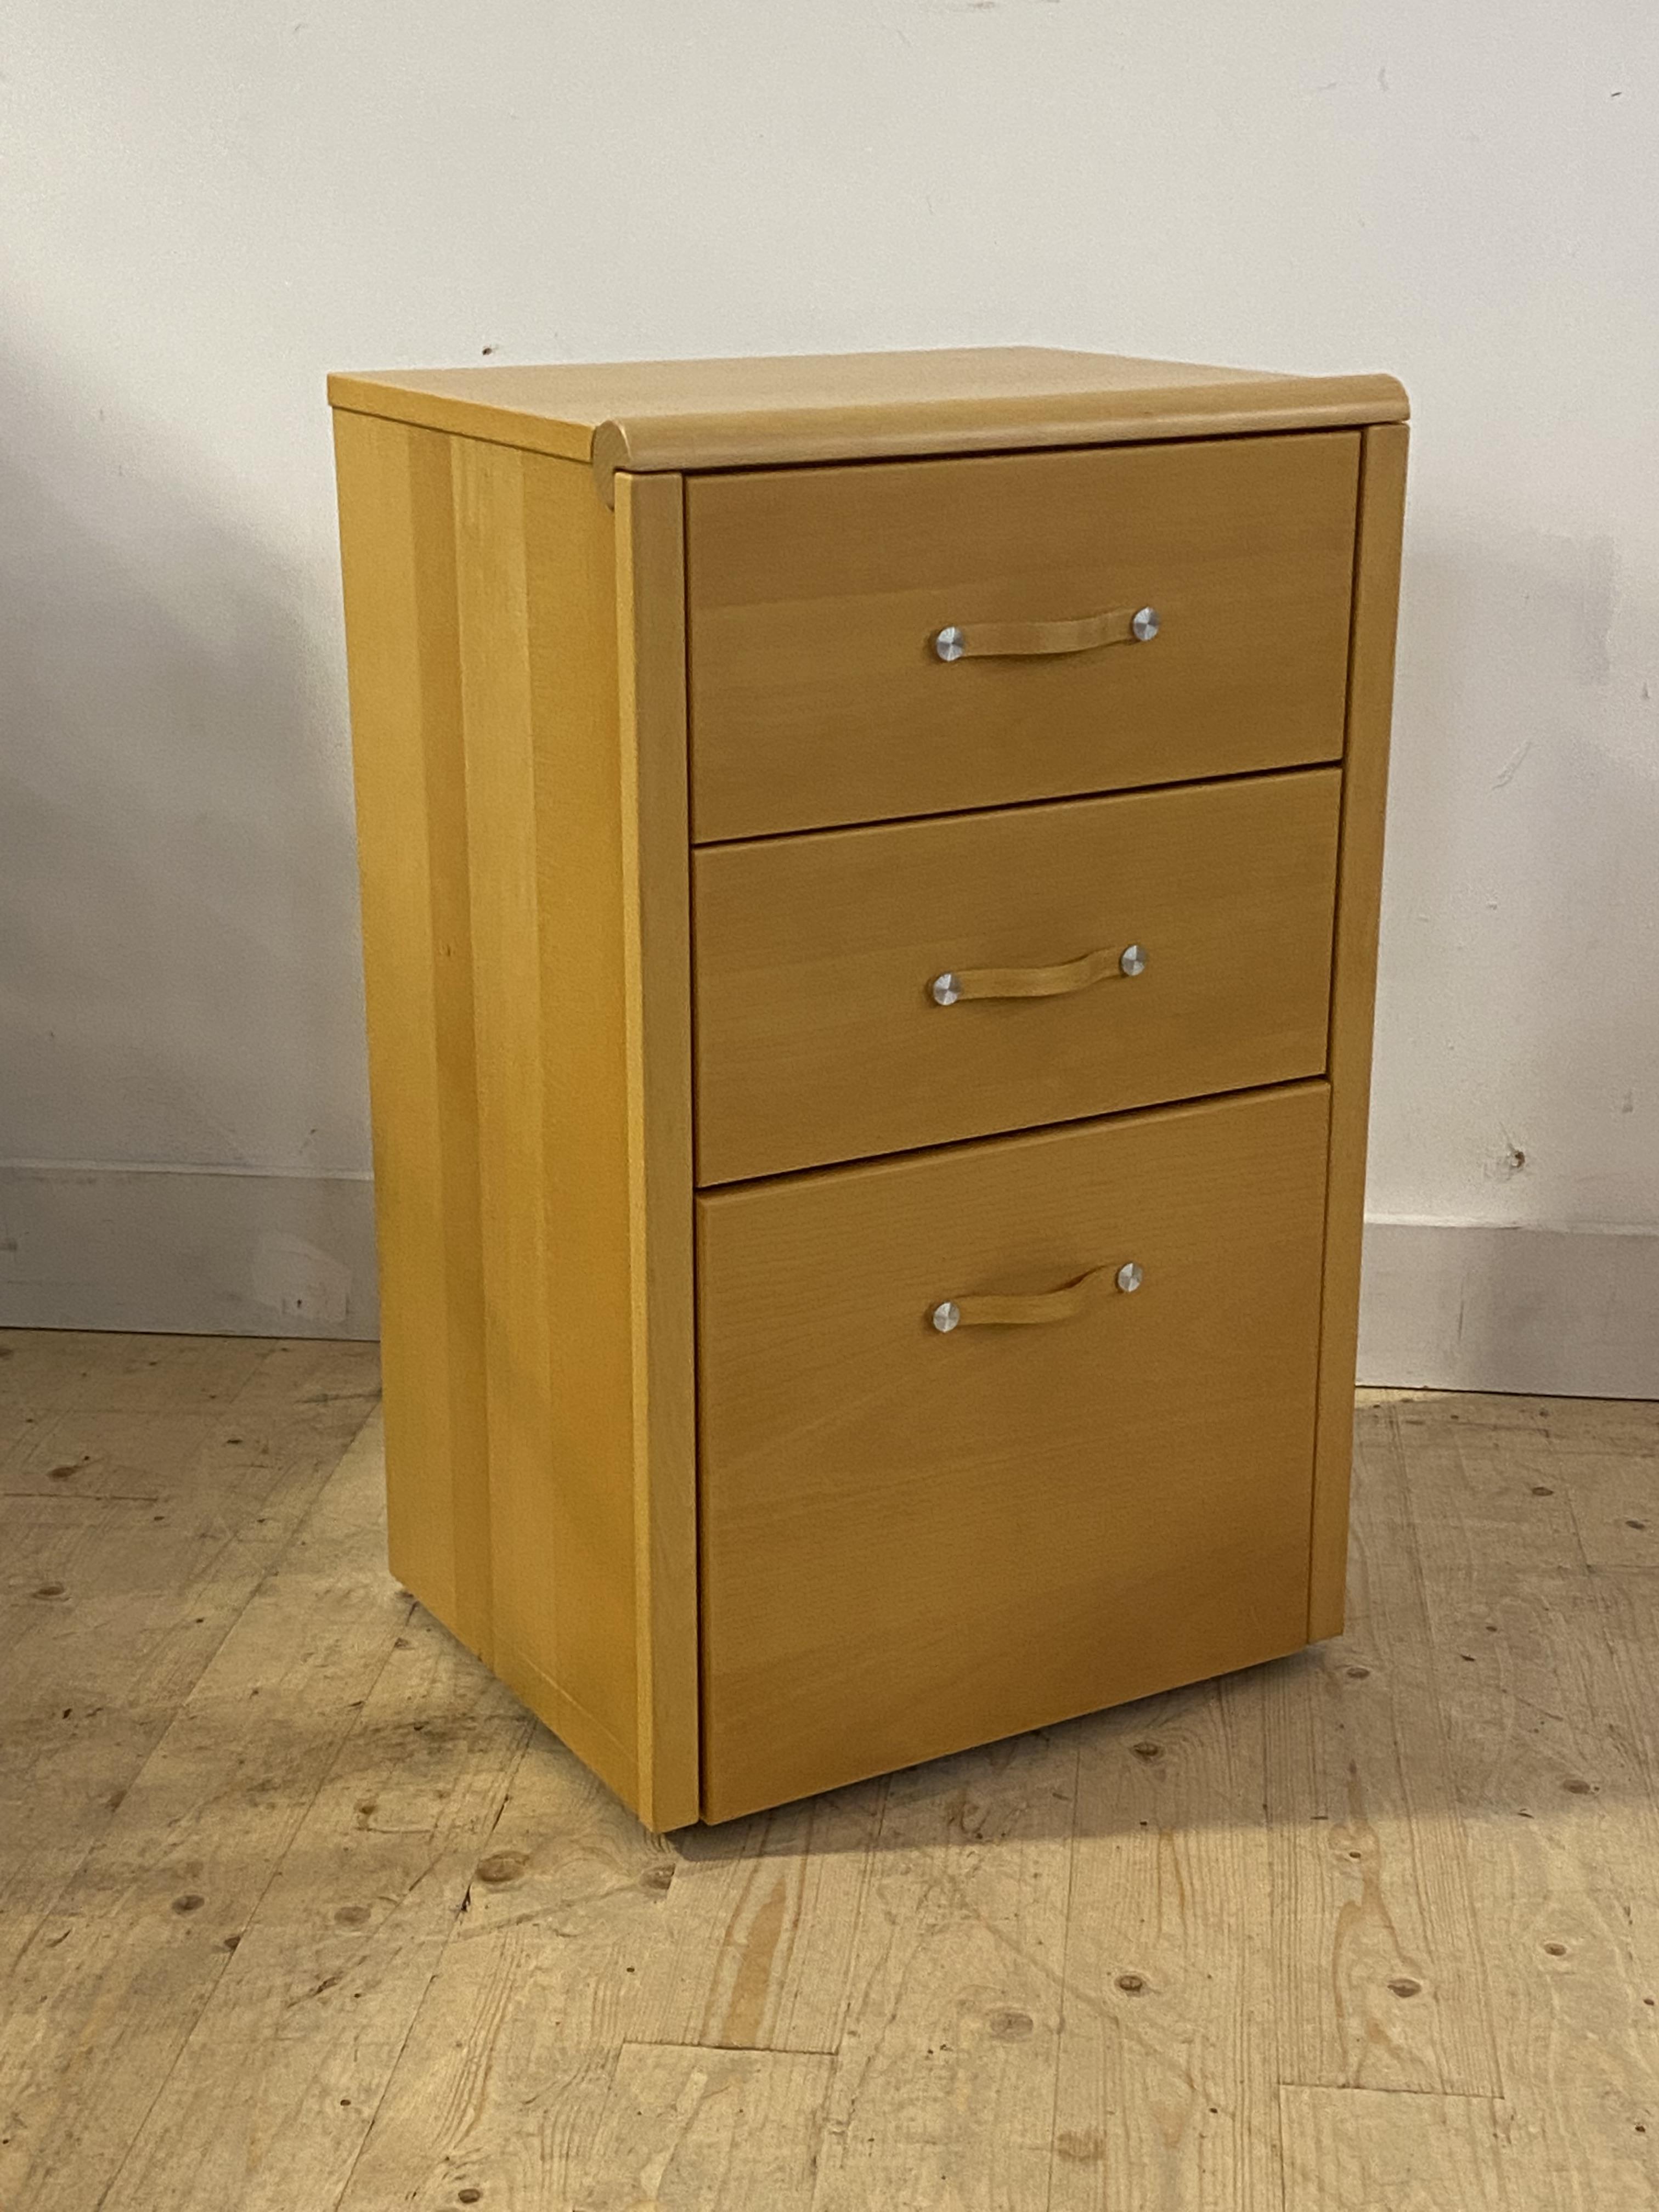 Hulsta, A German light beech veneered chest fitted with three drawers, H81cm, W50cm, D40cm